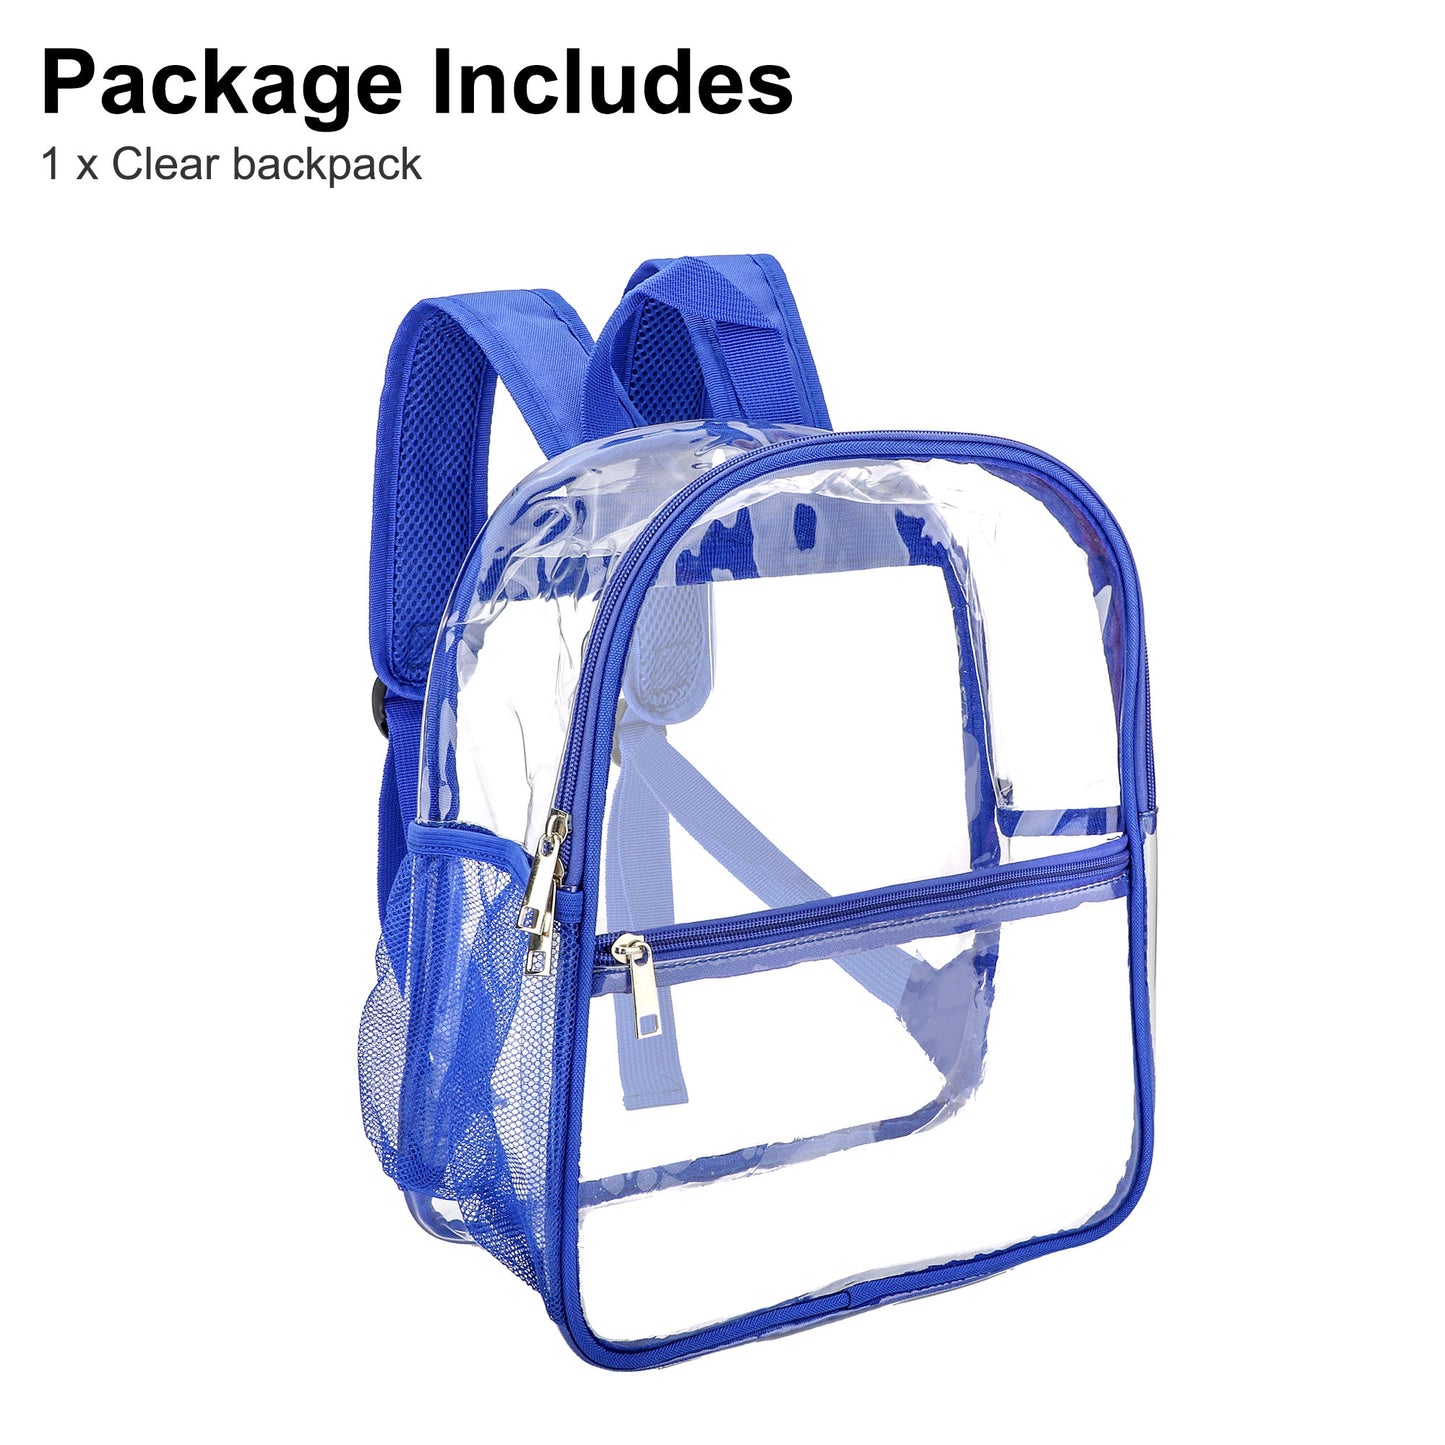 Transparent Clear Backpack - Water-Resistant and Durable, Ideal for Security Checks